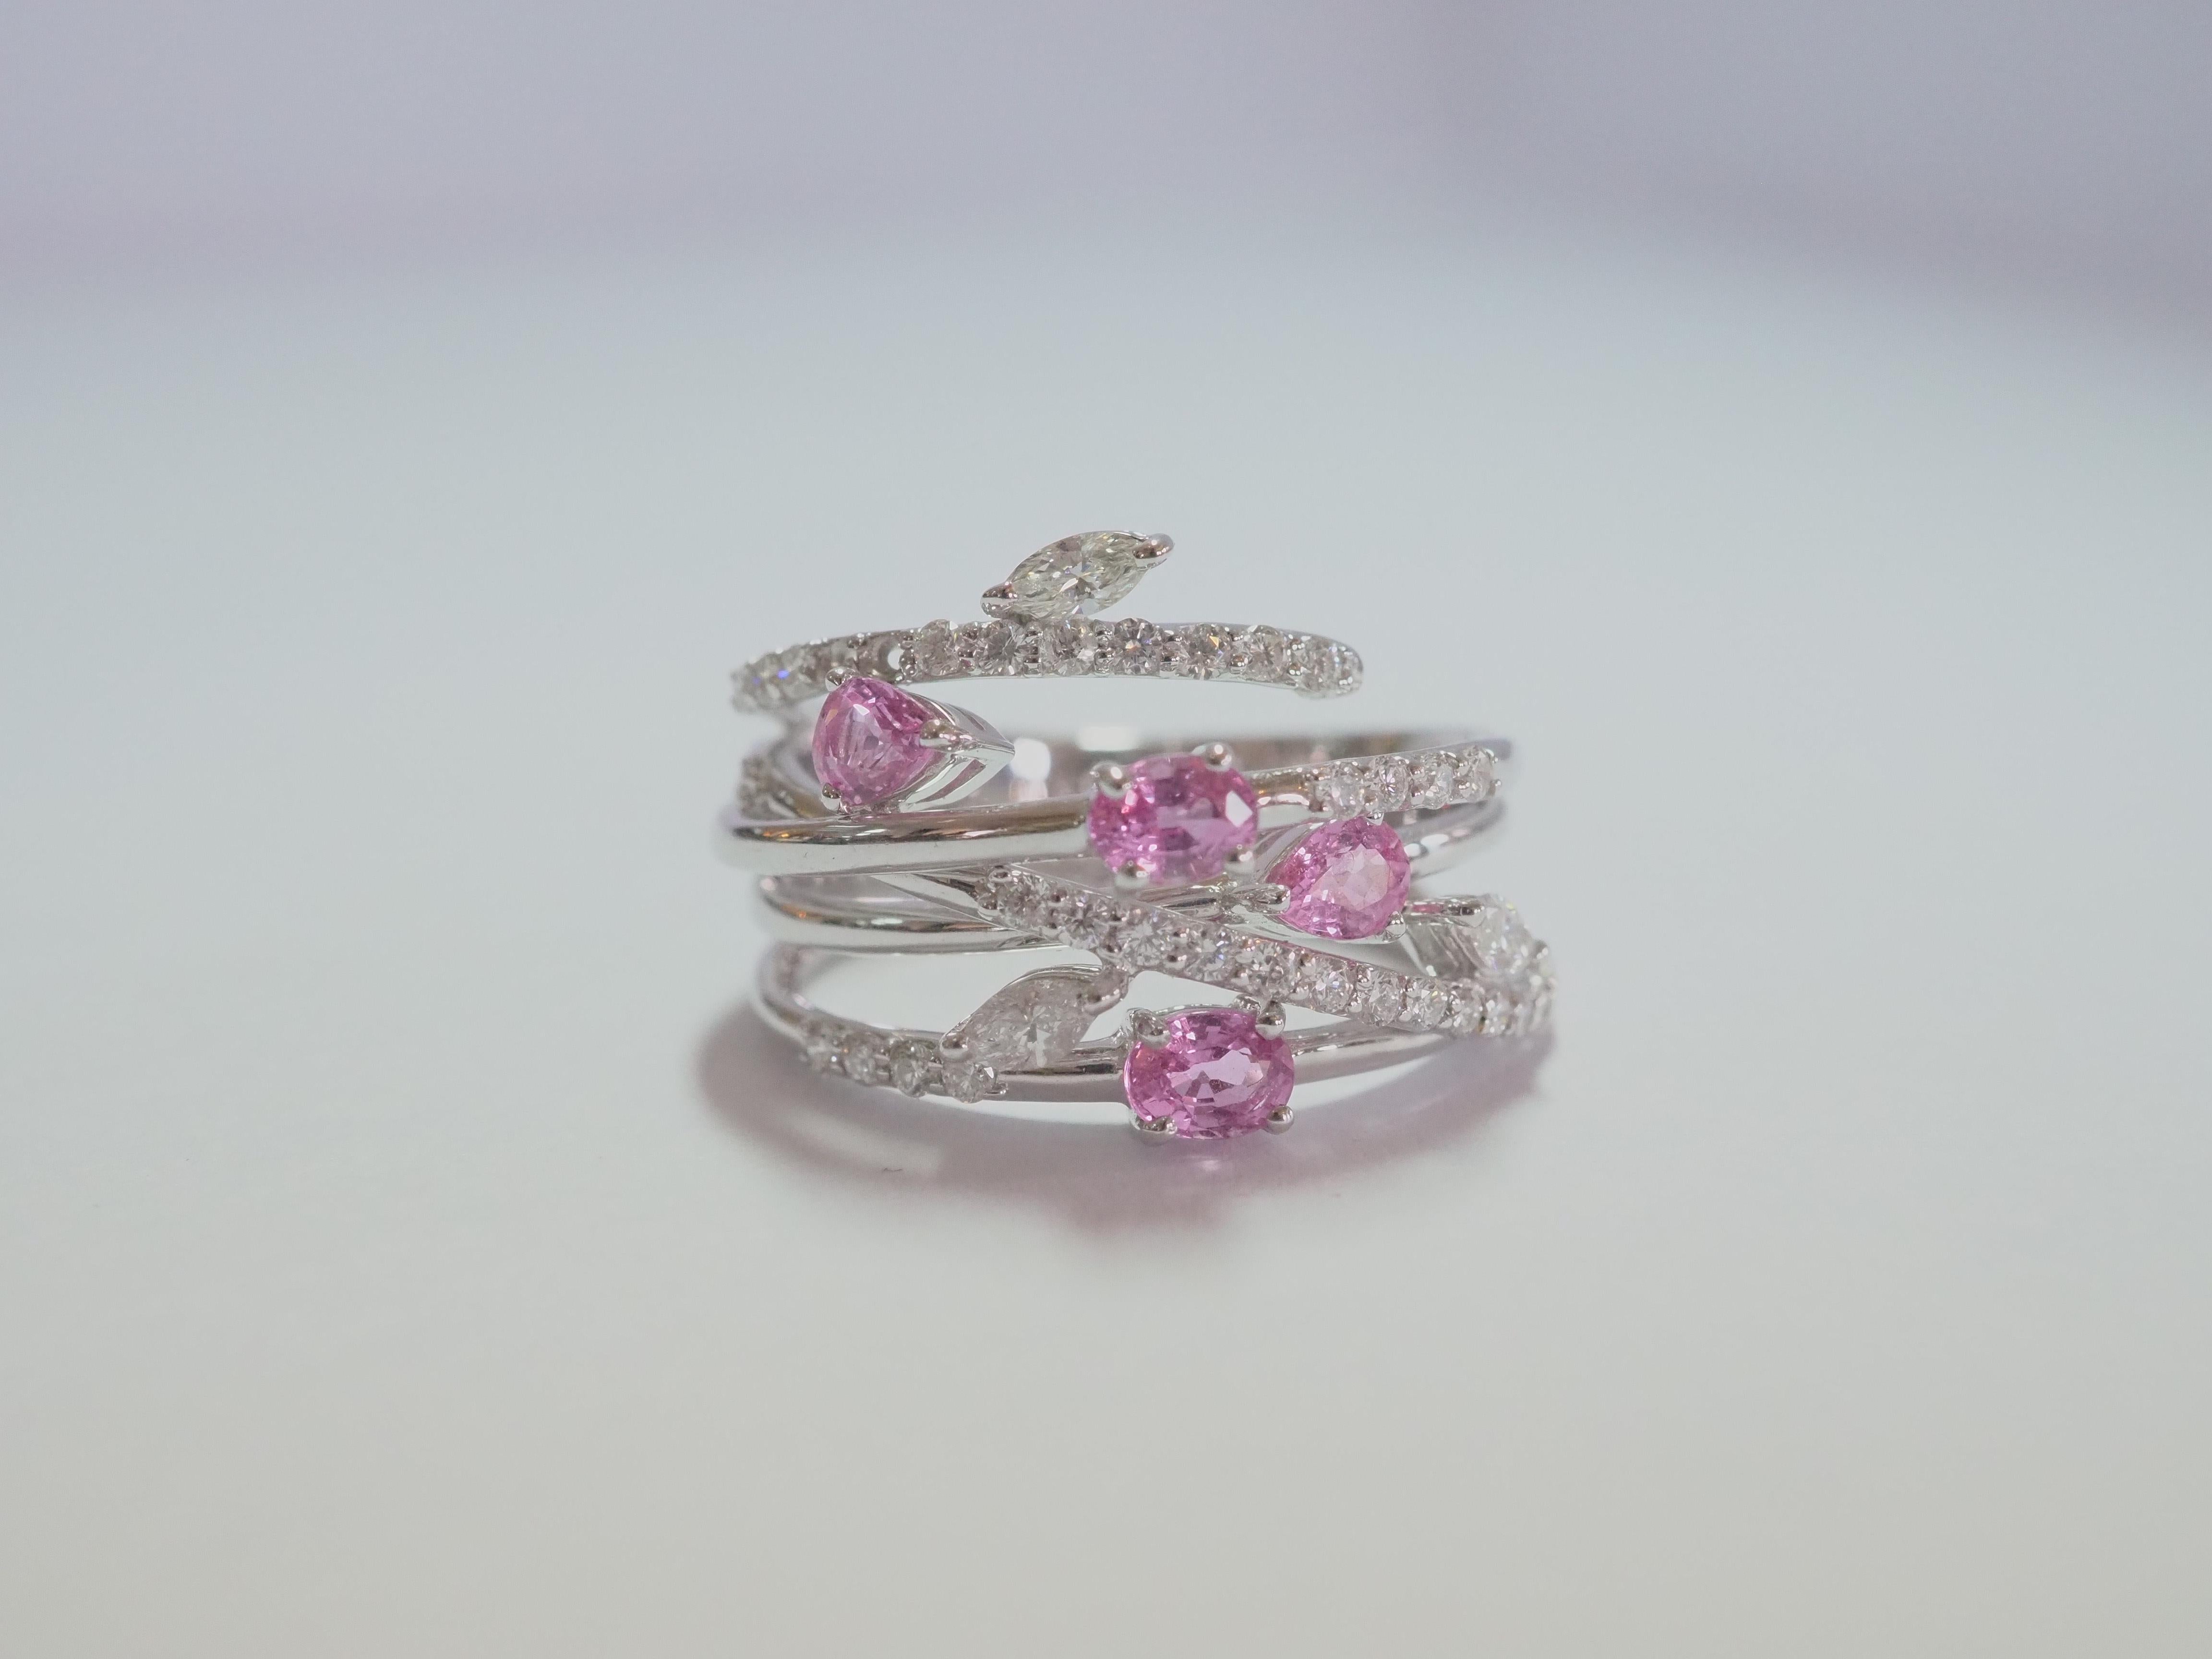 This fine designer piece is very elegant. The bright bubblegum pink sapphires of 2 pear cuts and 2 oval cuts are set neatly on the viny band. This piece is clearly Inspired by floral themes using marquise cut diamonds and arranging them to be flower